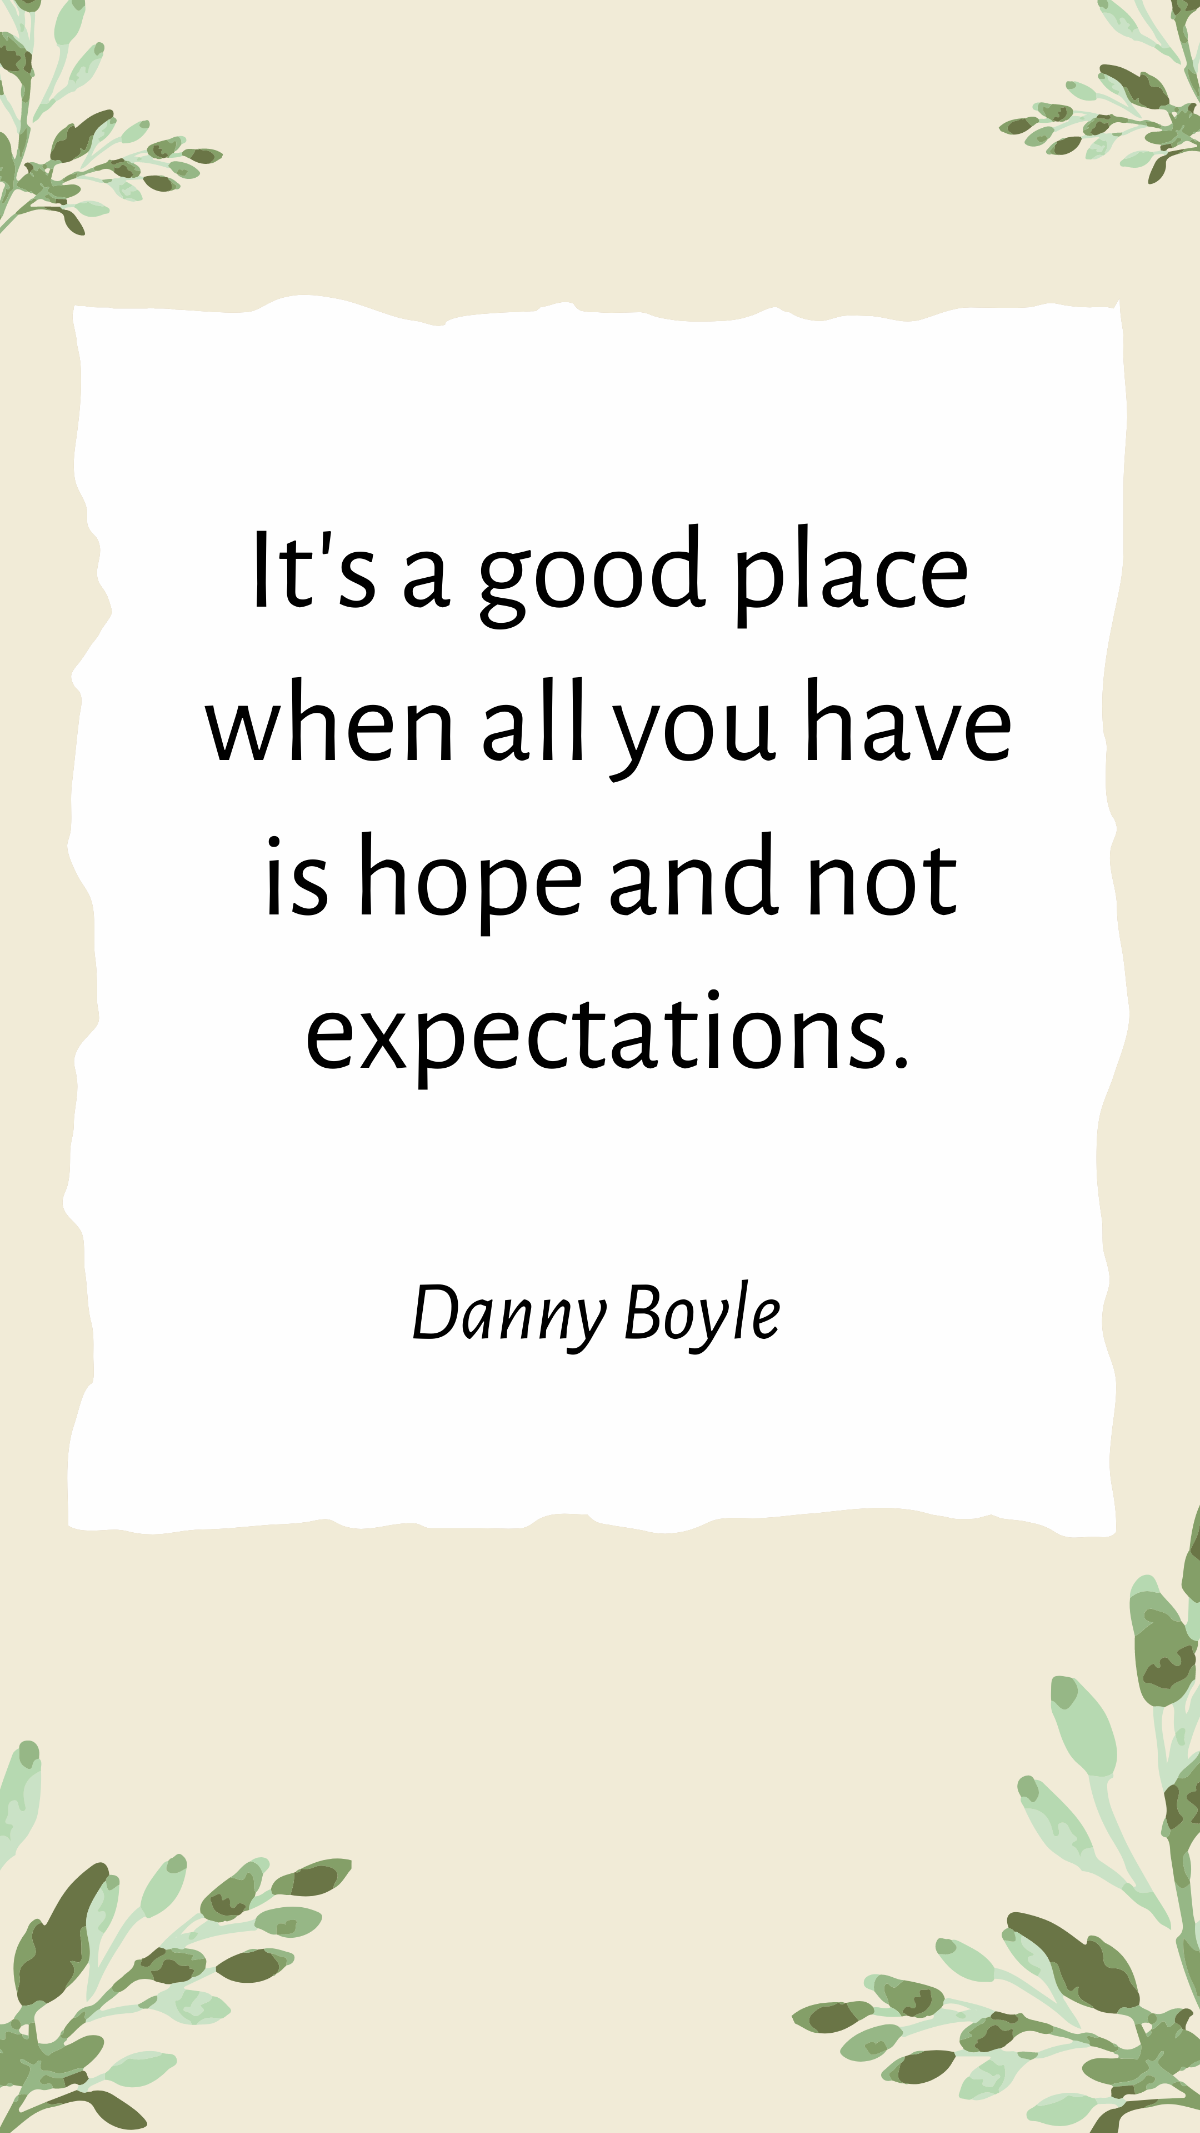 Danny Boyle - It's a good place when all you have is hope and not expectations.